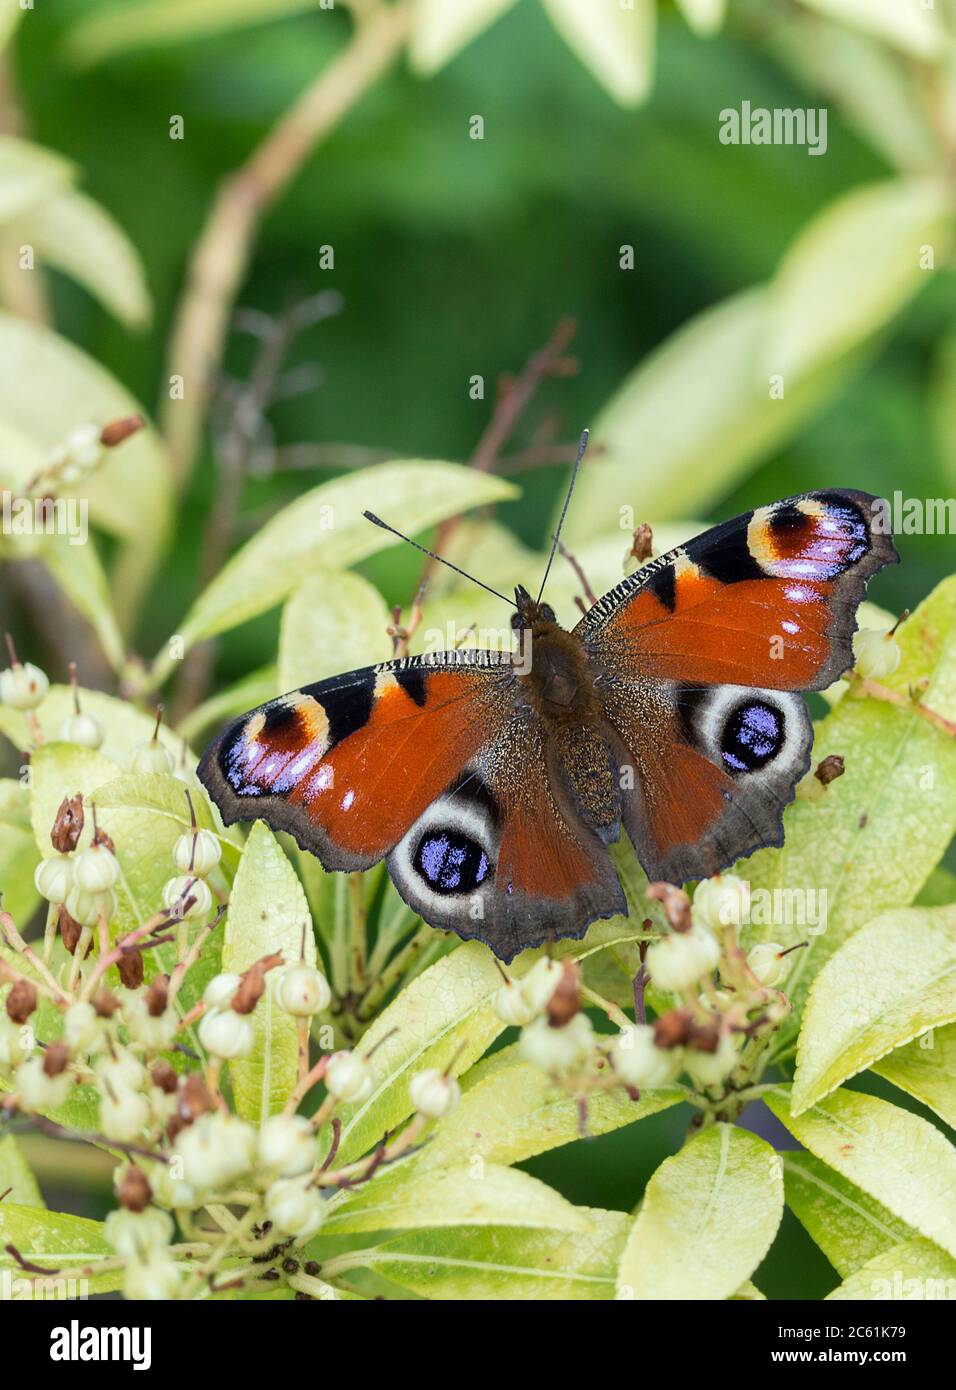 Peacock butterfly (Inachis io) maroon upperwings with bold eye like markings in purple creamy white black and smoky grey. Underwings smoky brown Stock Photo